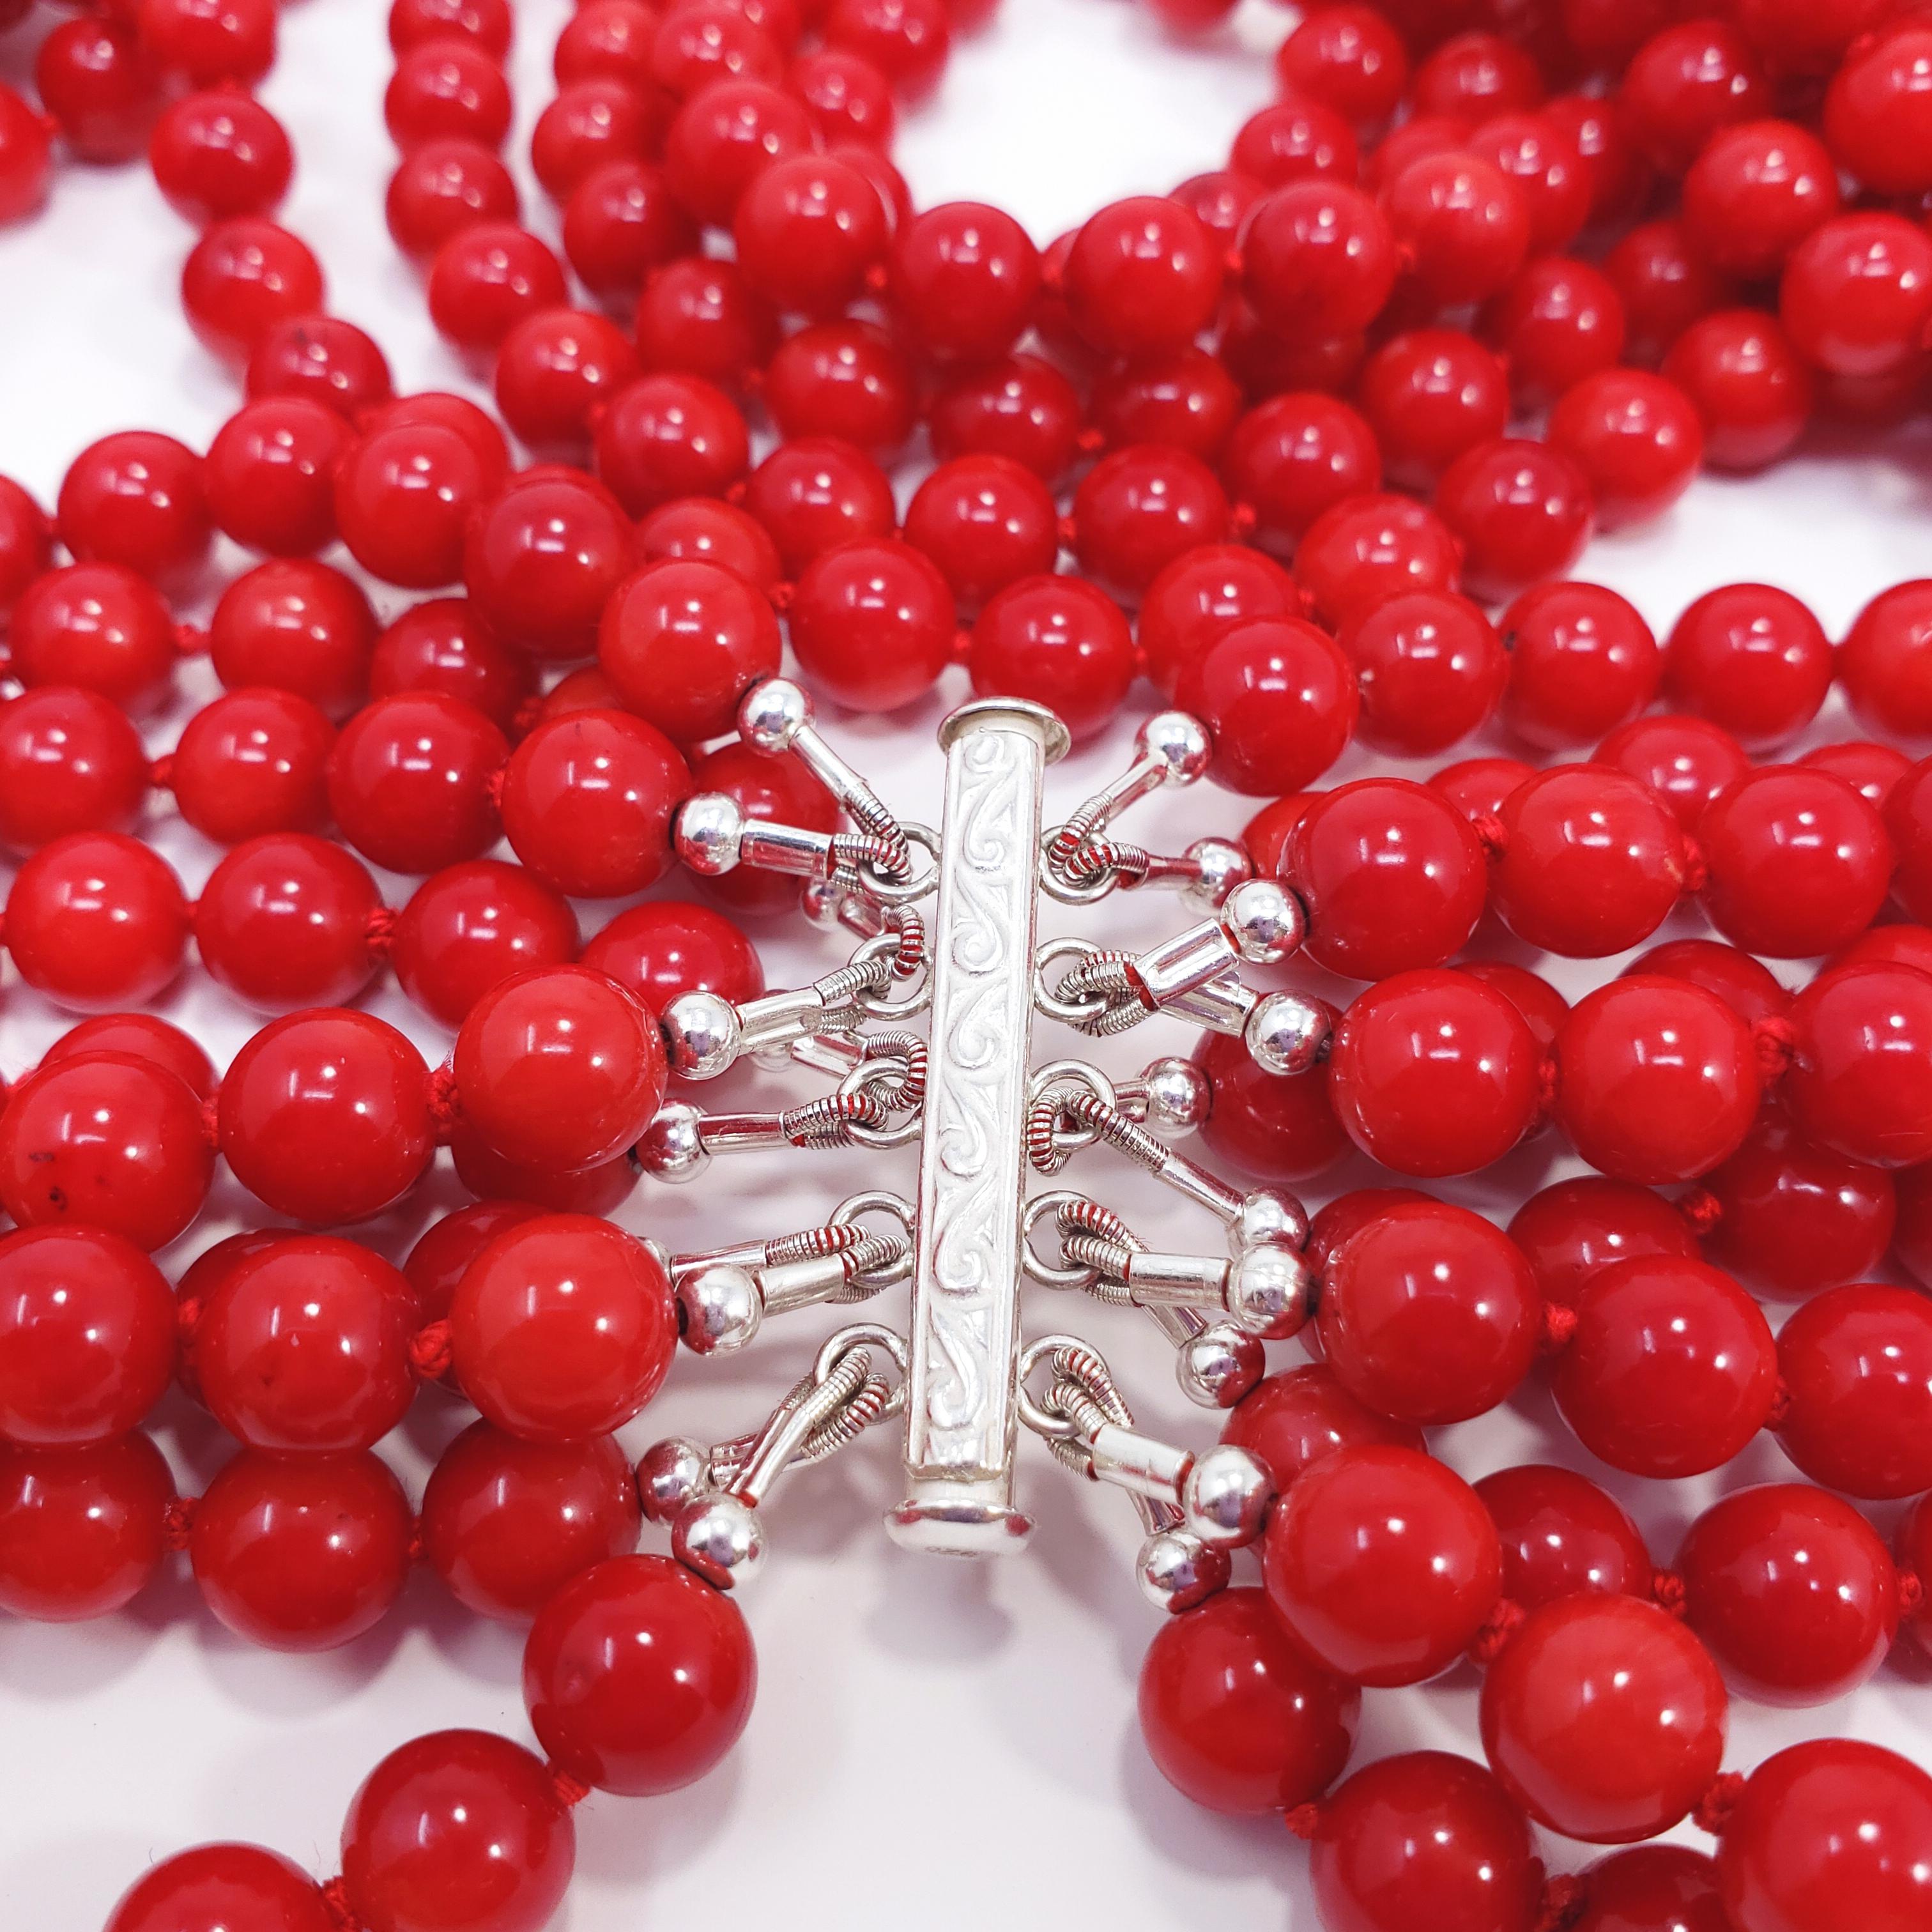 Women's 10 Strand Genuine Red Coral 7mm Bead Necklace with Sterling Silver Sliding Clasp